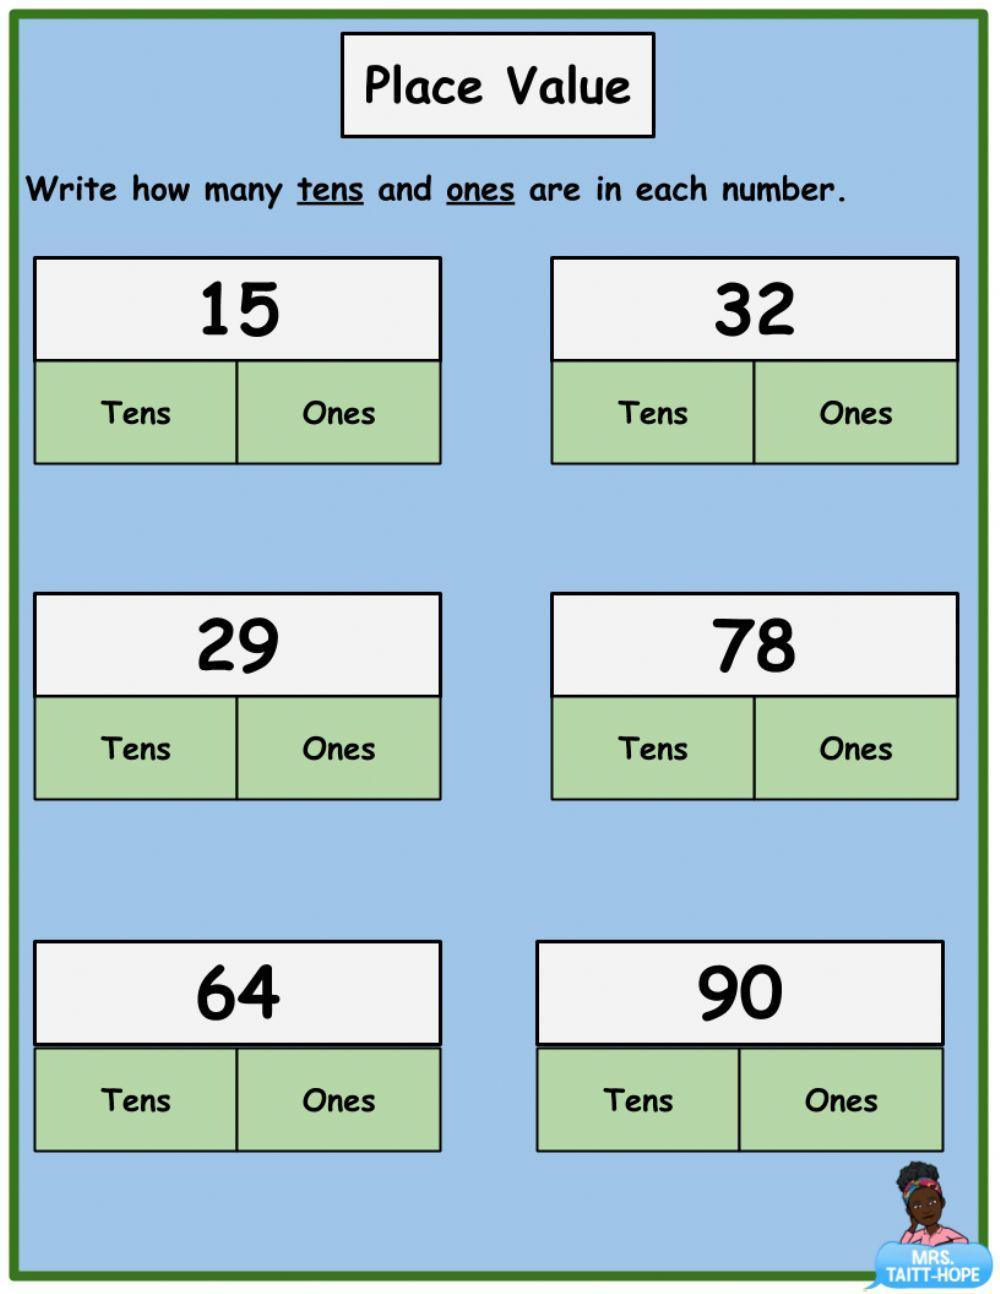 Place Value of 2 Digit Numbers